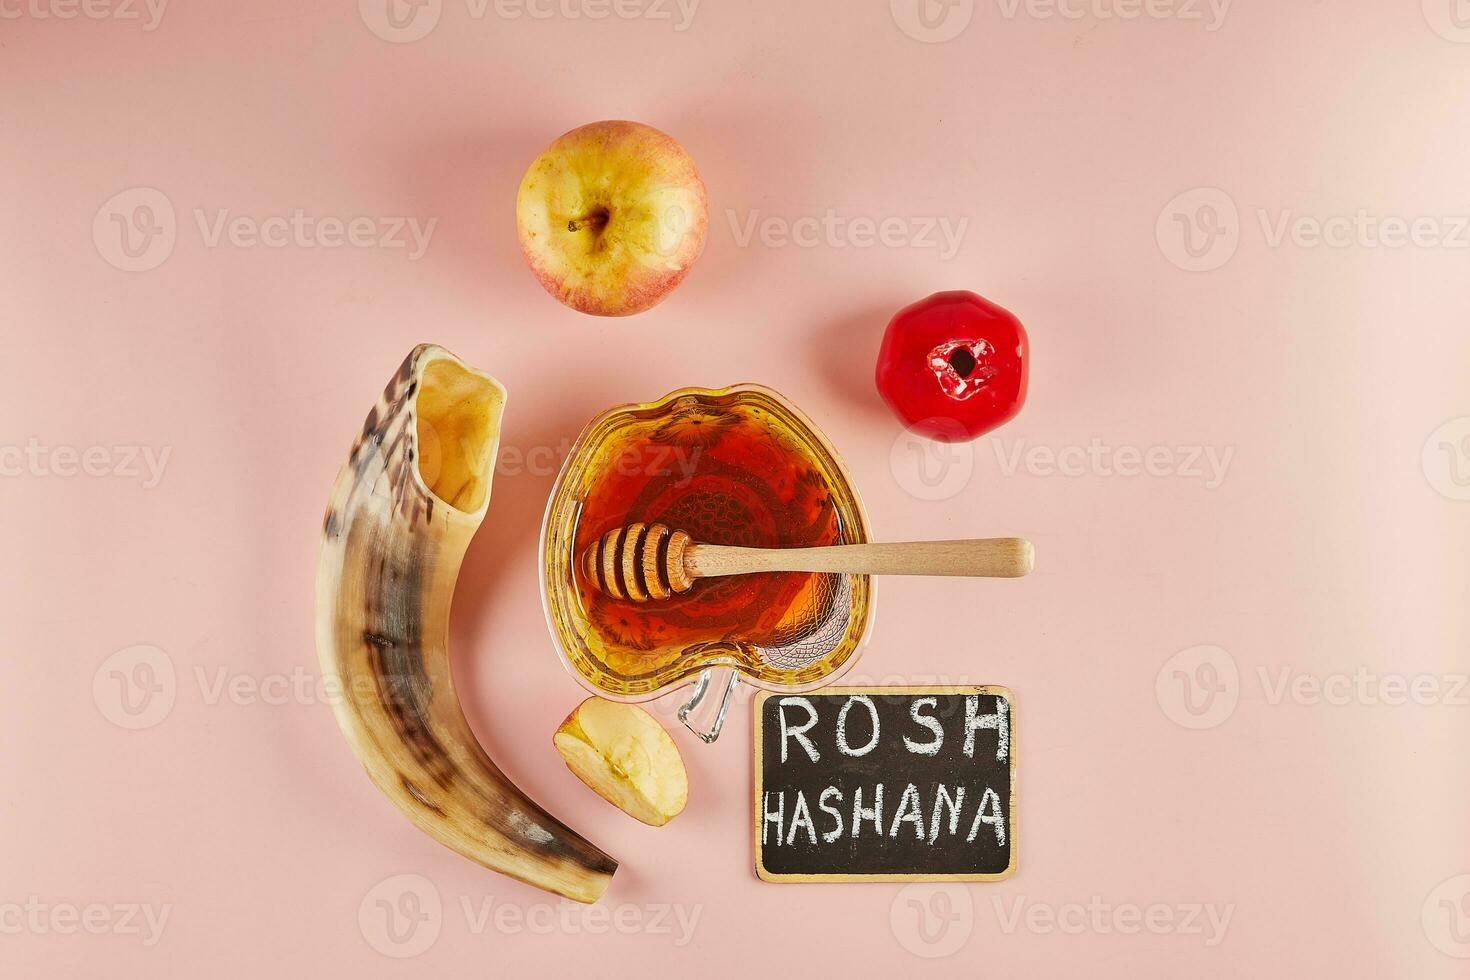 Rosh hashanah lettering - jewish new year holiday concept. Bowl in the shape of an apple with honey, apples, pomegranates, shofar on pink background. photo